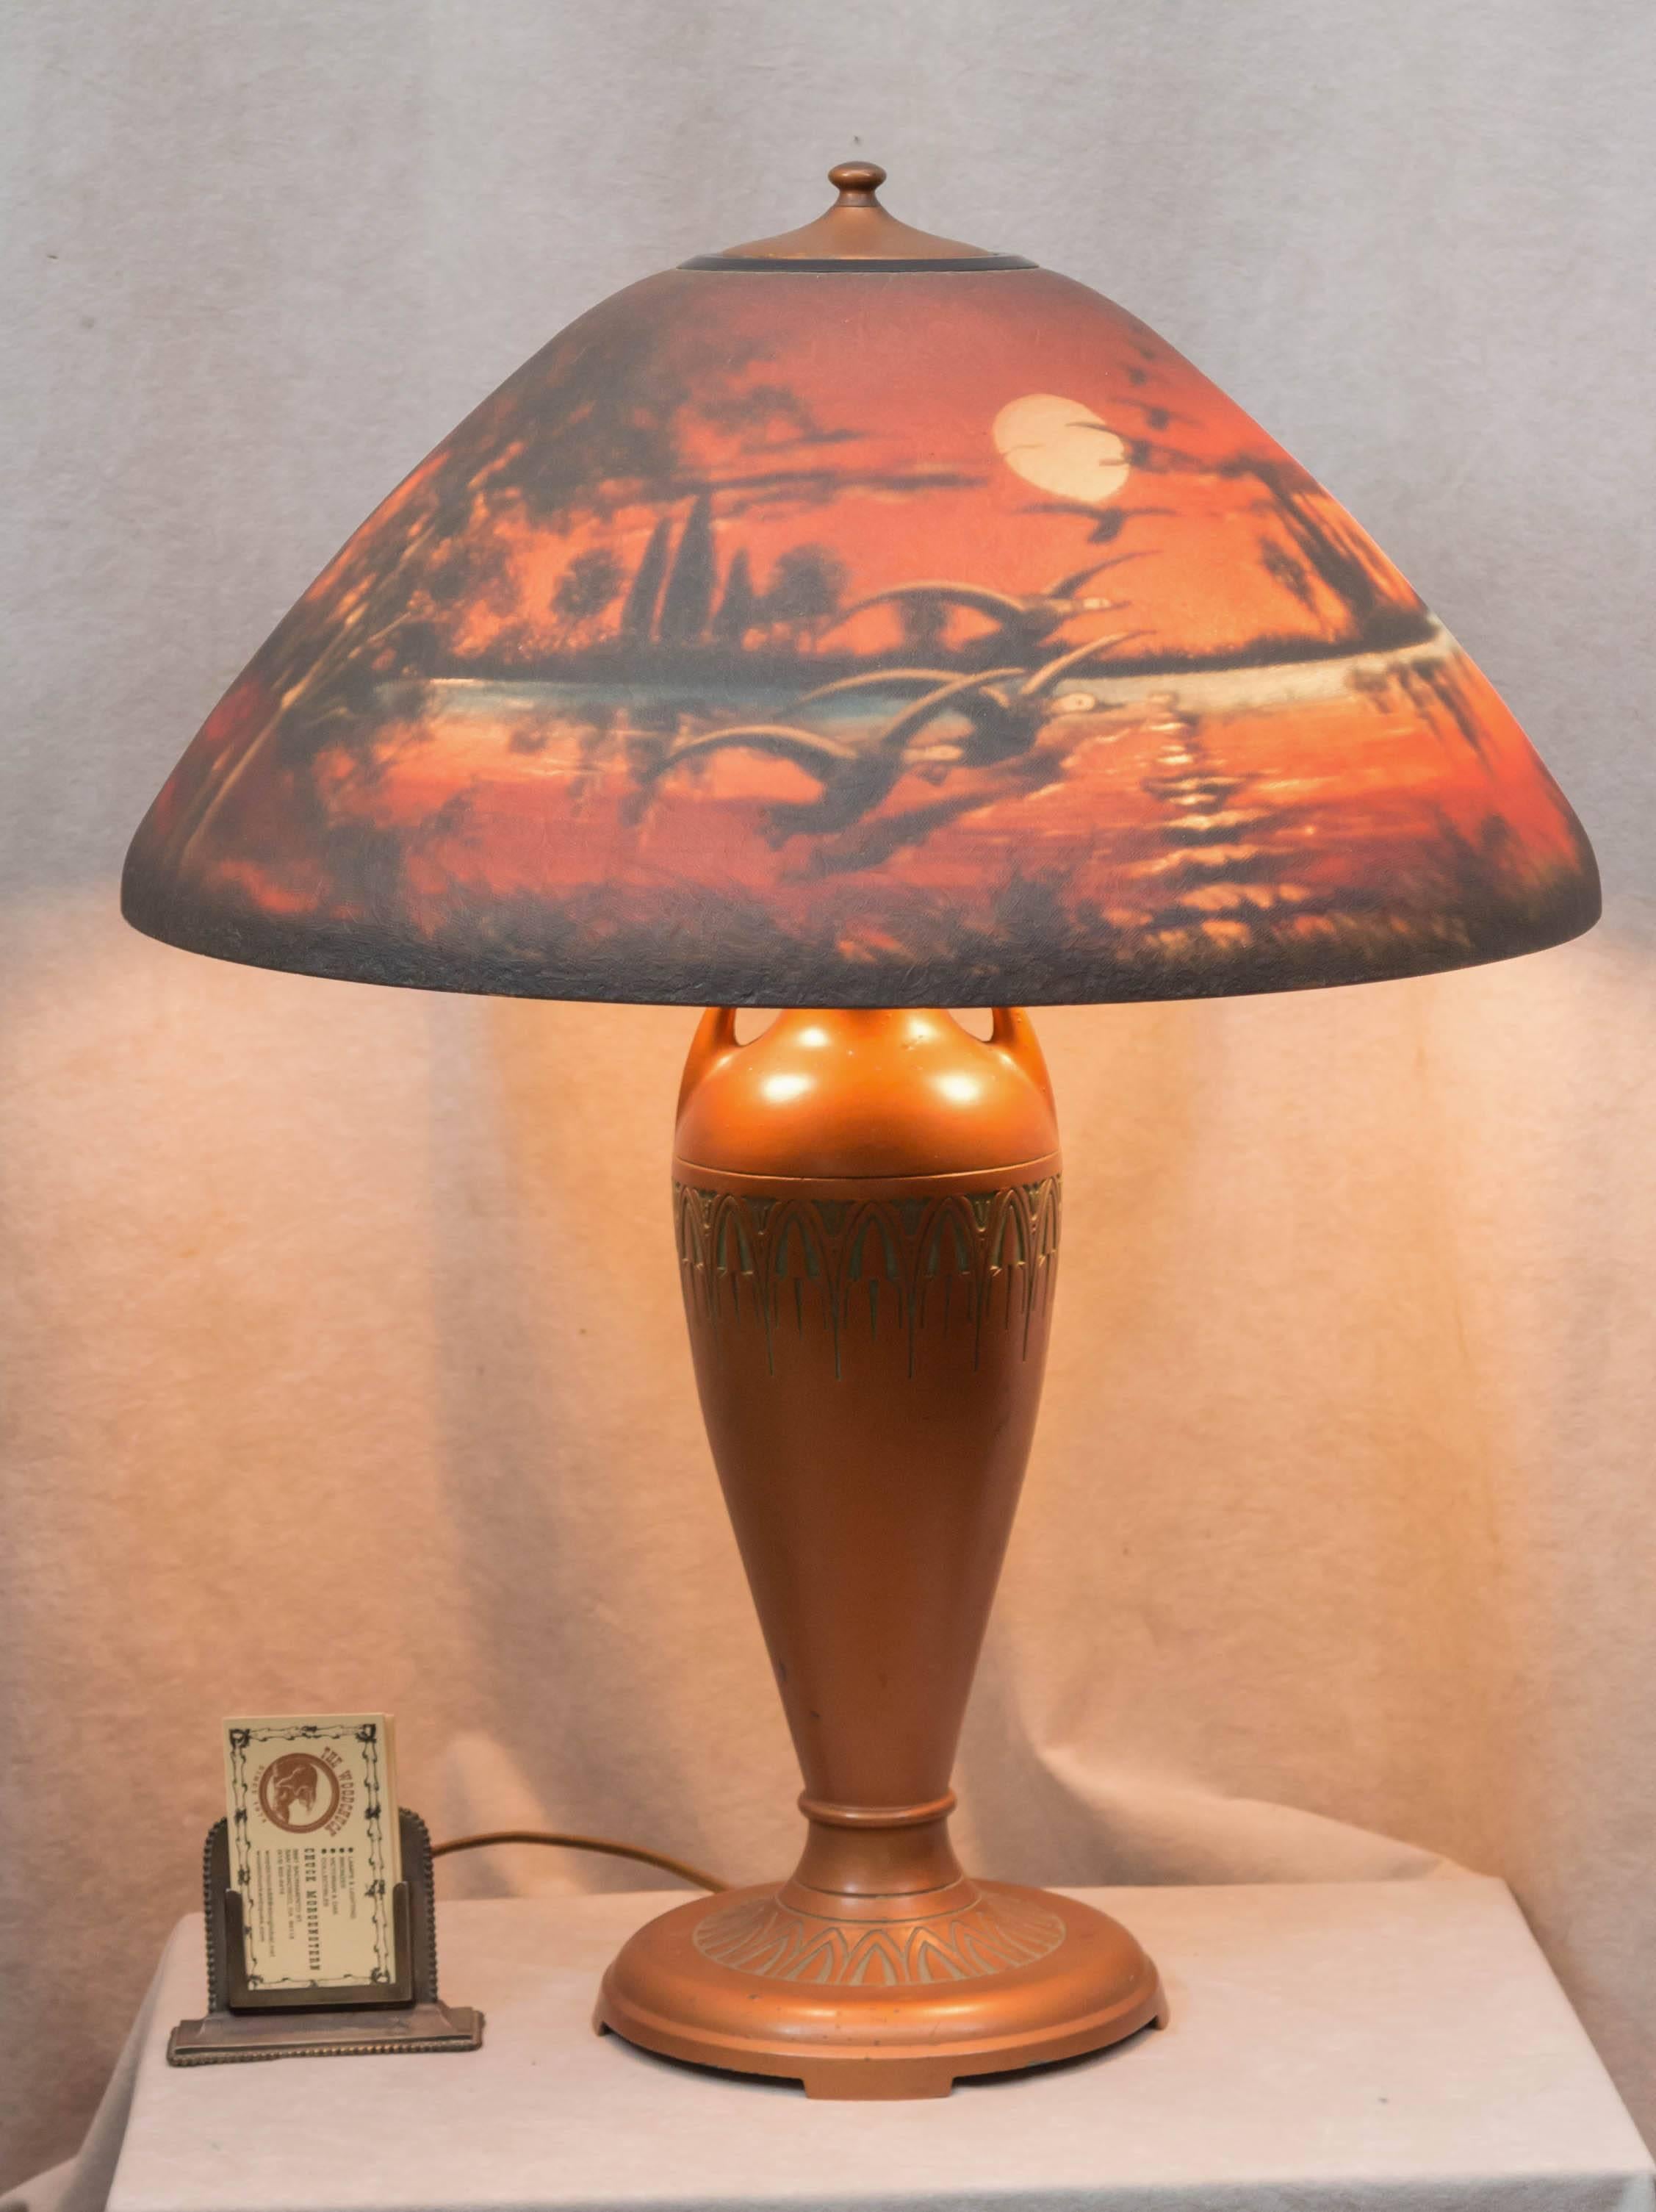 We sell lots of antique table lamps in our shop. We mainly sell Tiffany and other leaded glass lamps. On occasion we will buy this style of lamp known as "reverse painted". These lamps are, in fact, painted on the inside. This is one of